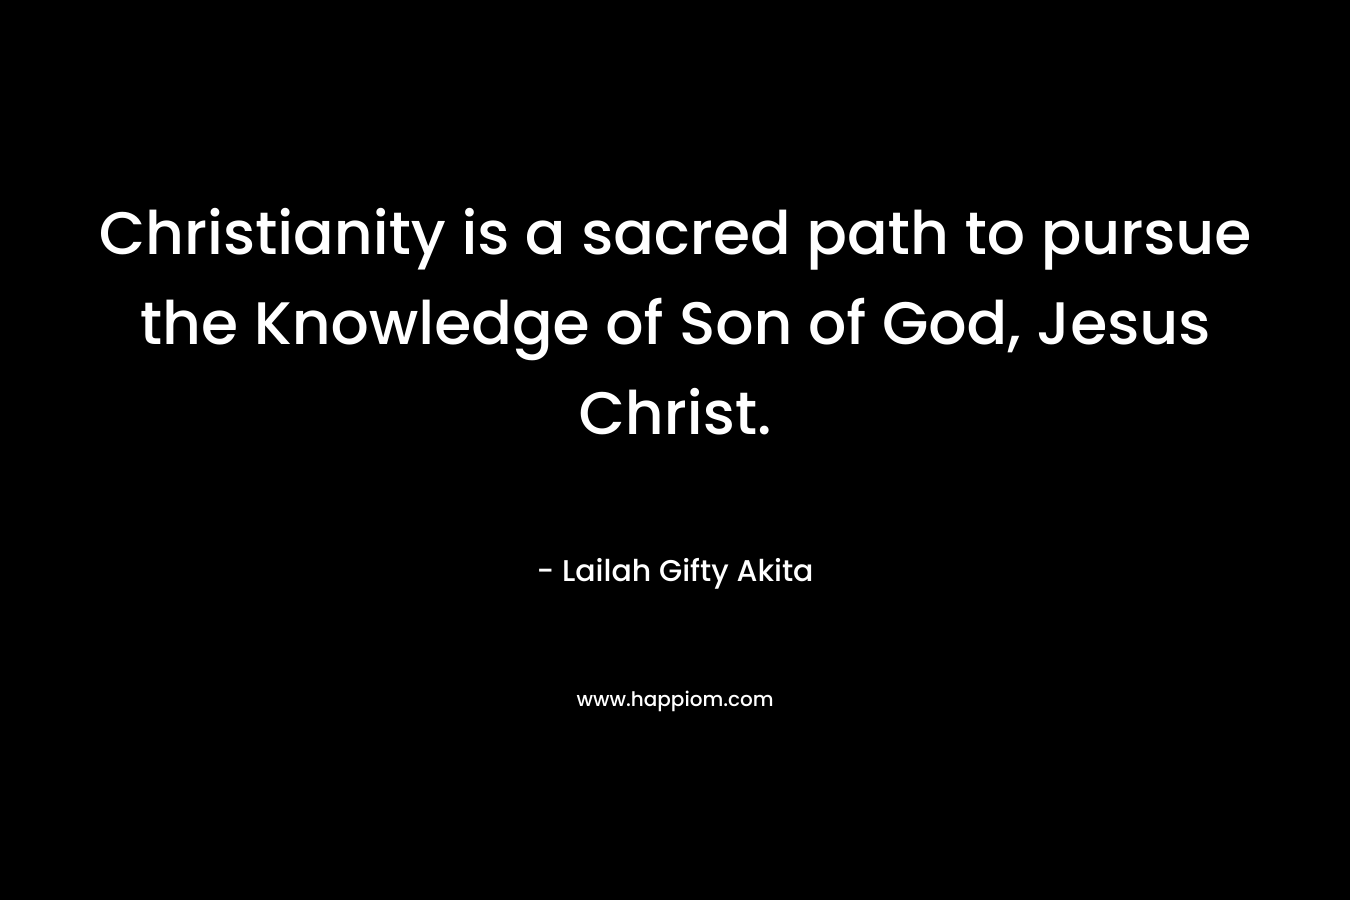 Christianity is a sacred path to pursue the Knowledge of Son of God, Jesus Christ.